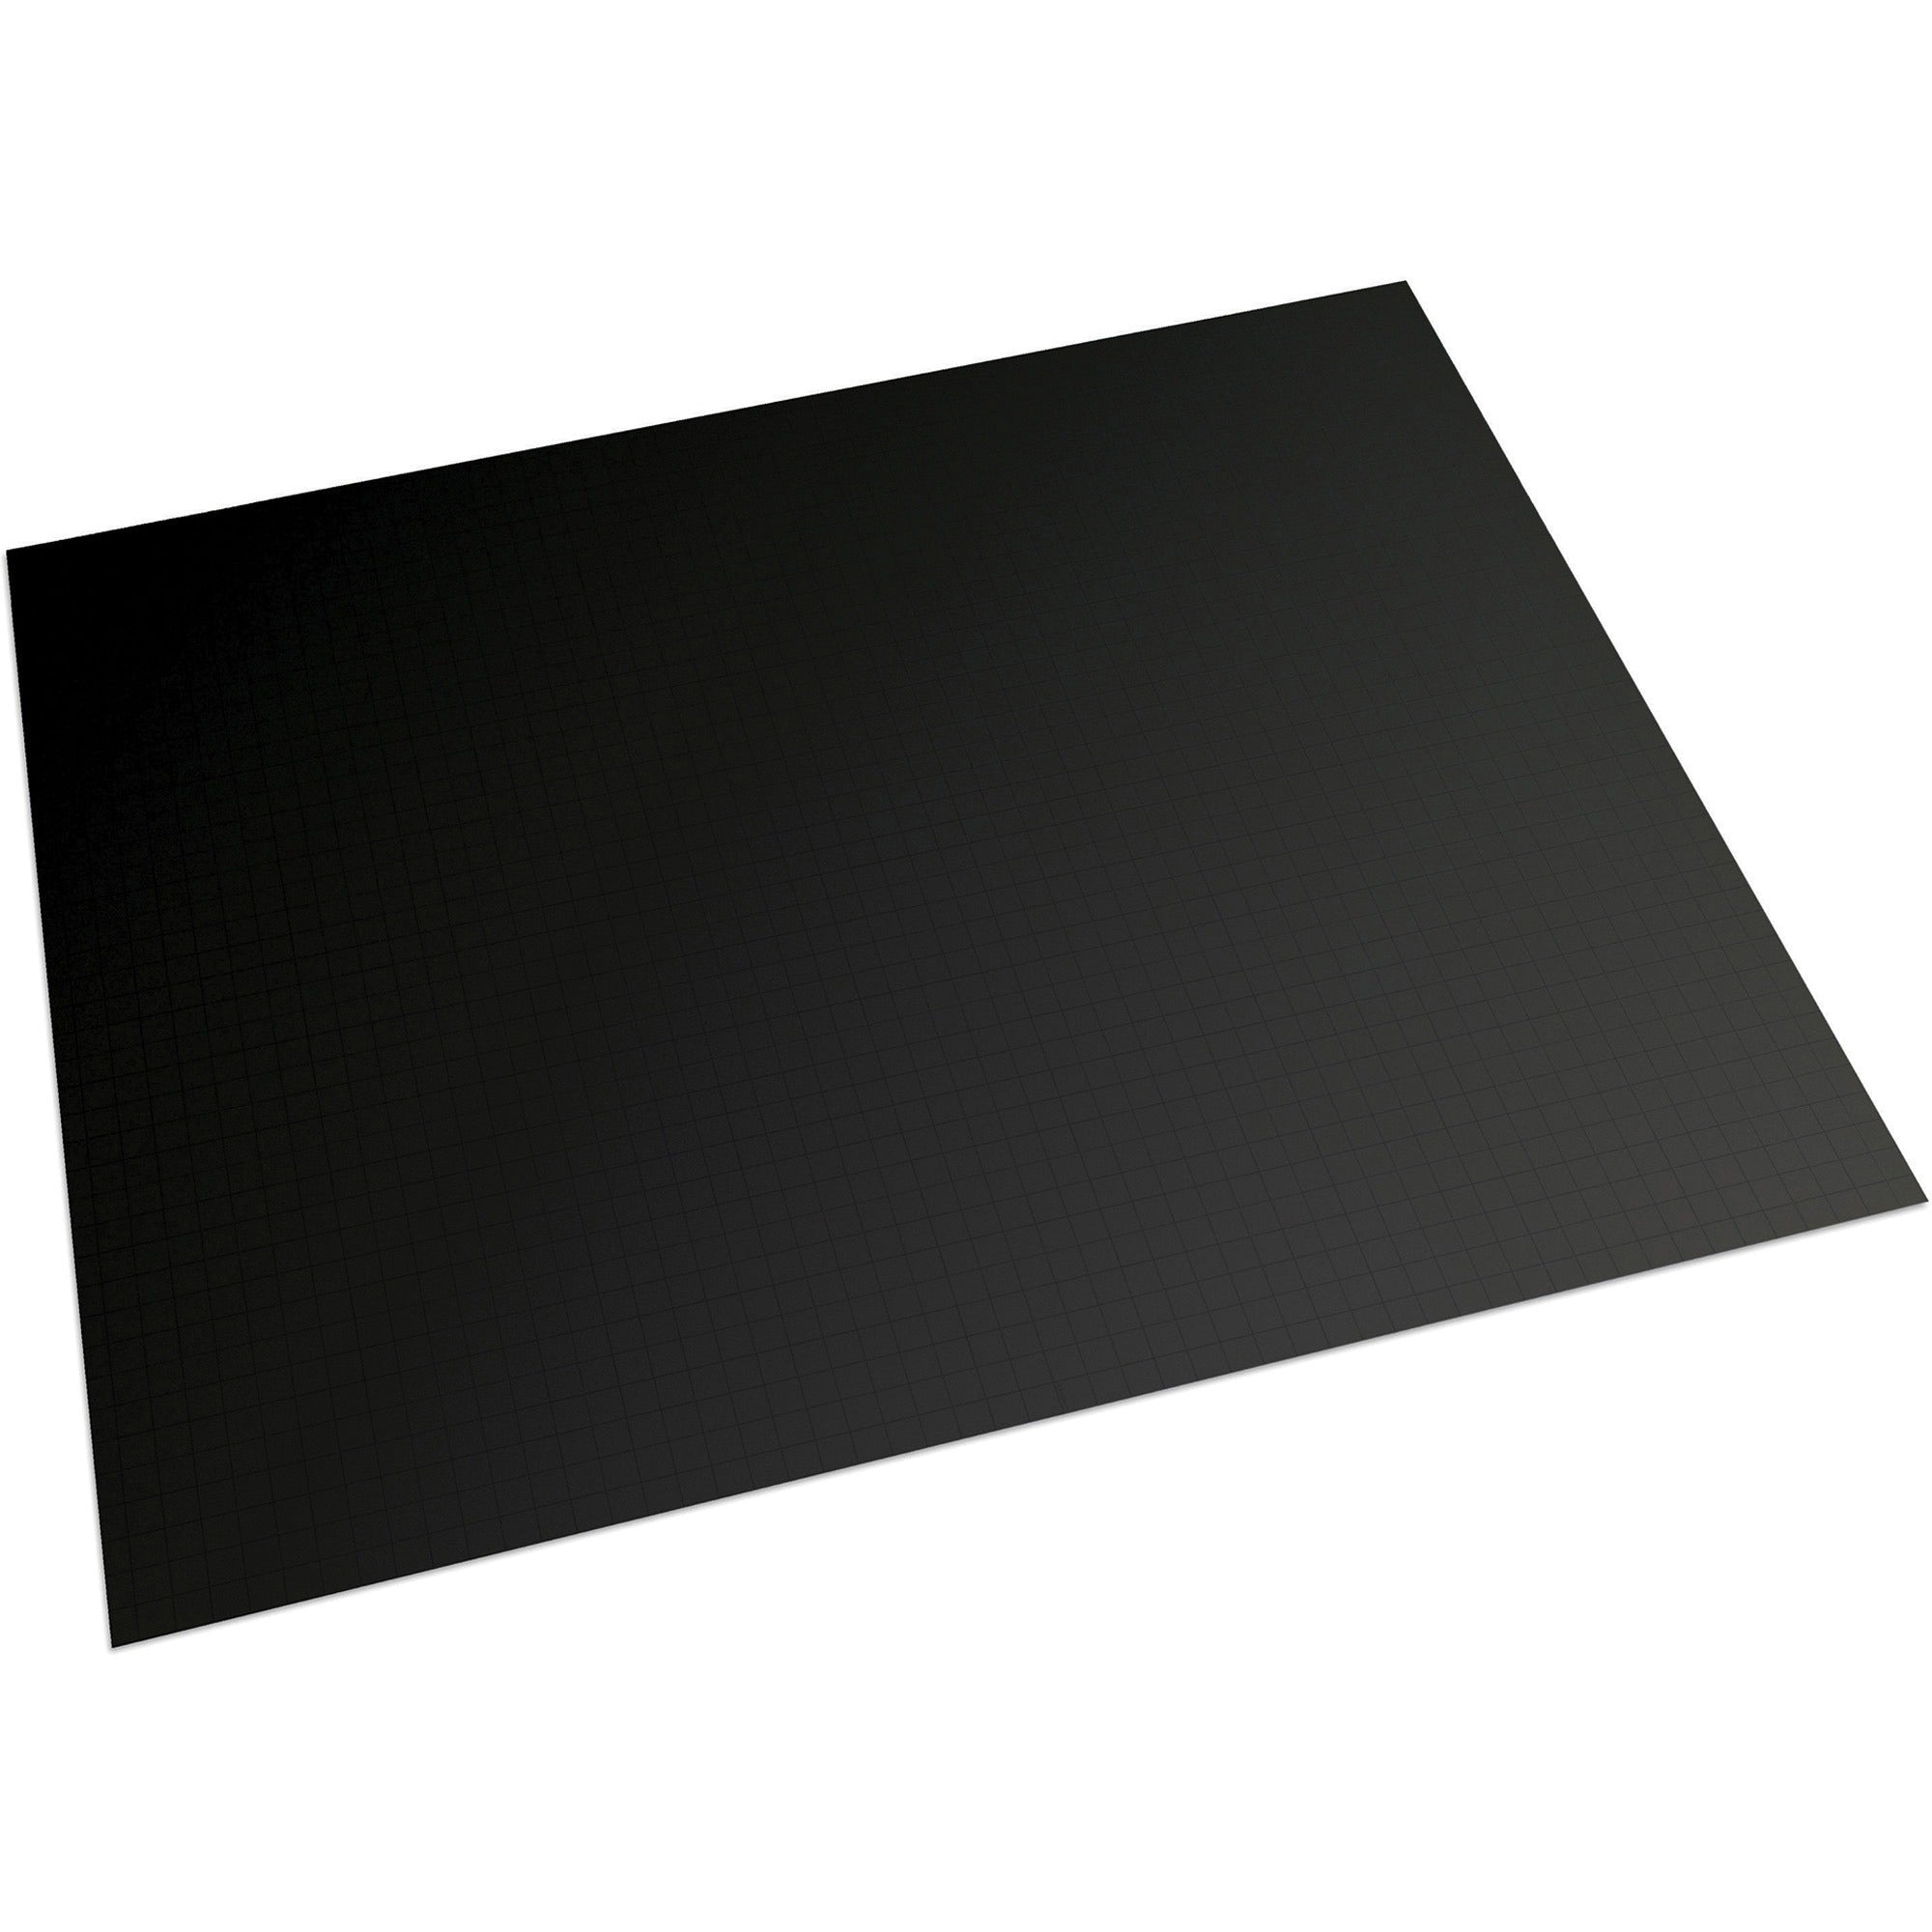 ucreate-faint-1-2-grid-foam-board-chart-wood-graph-decoration-home-art-office-craft-school-project-mounting-display--x-22width-x-1875-milthickness-x-28length-10-carton-black-foam-polystyrene_paccar12007 - 1